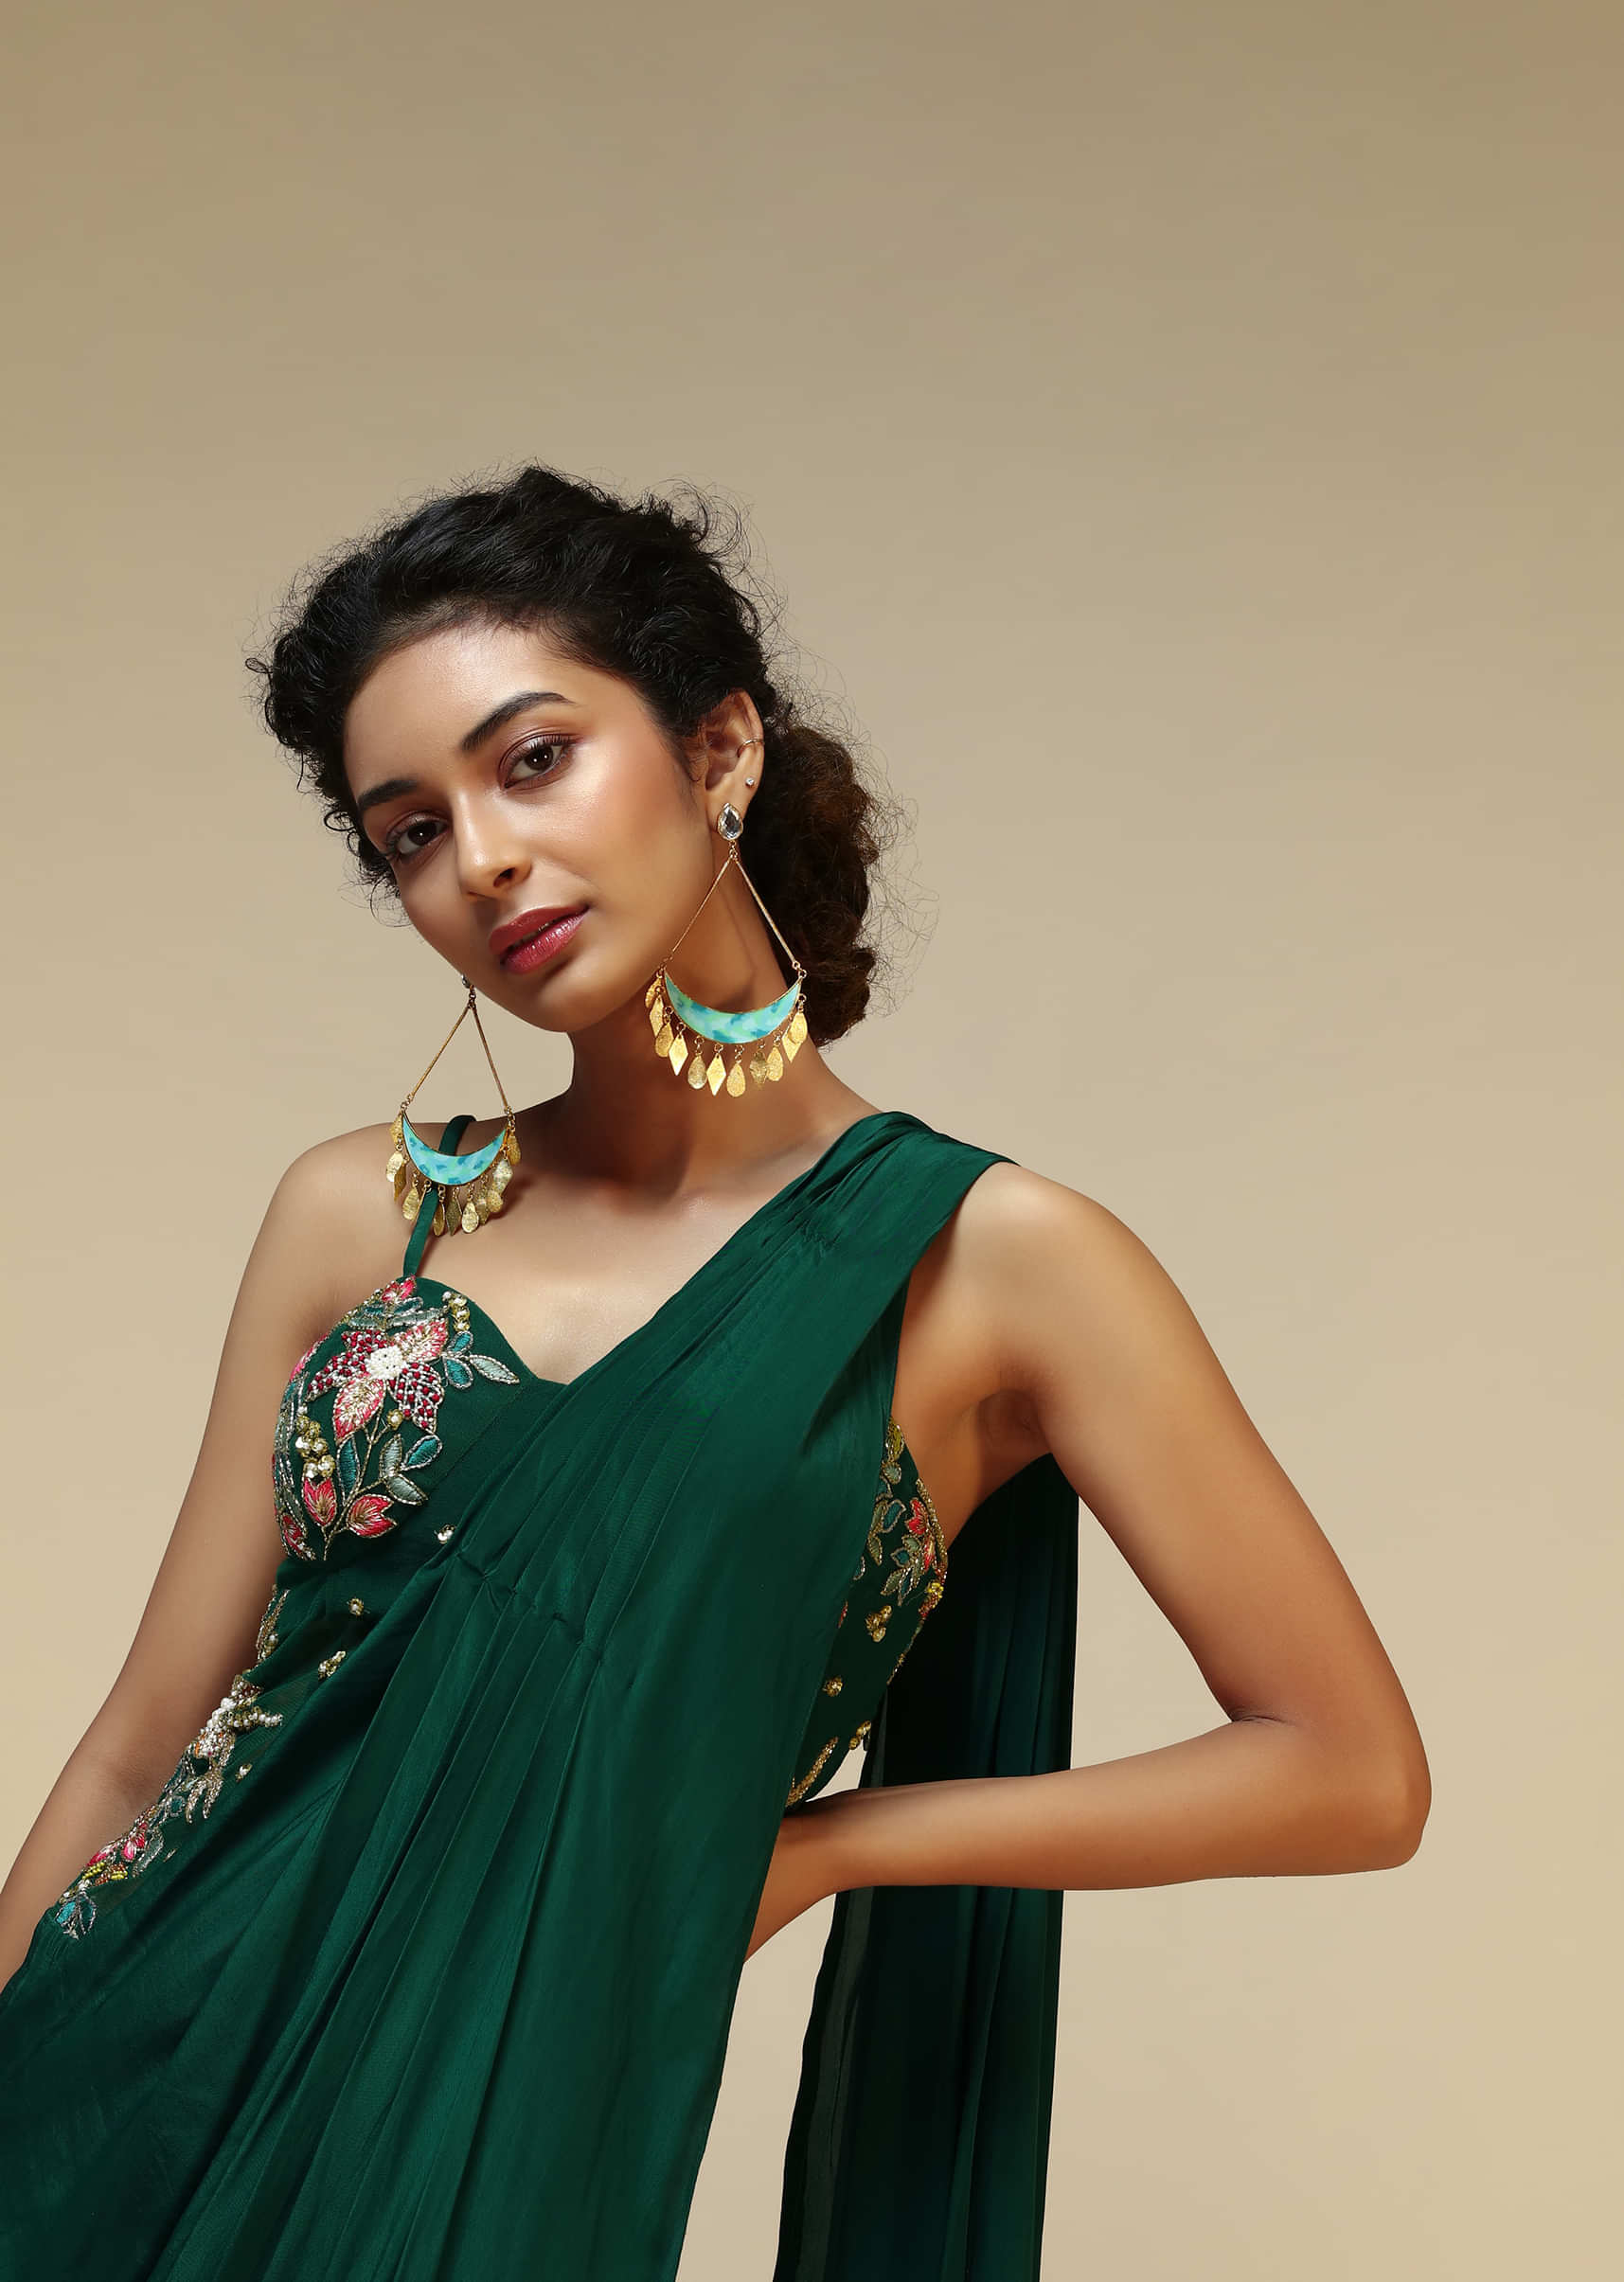 Bottle Green Saree Gown With A Crepe Cowl Drape And Sheer Embroidered Net Bodice With Colorful Resham Flowers  